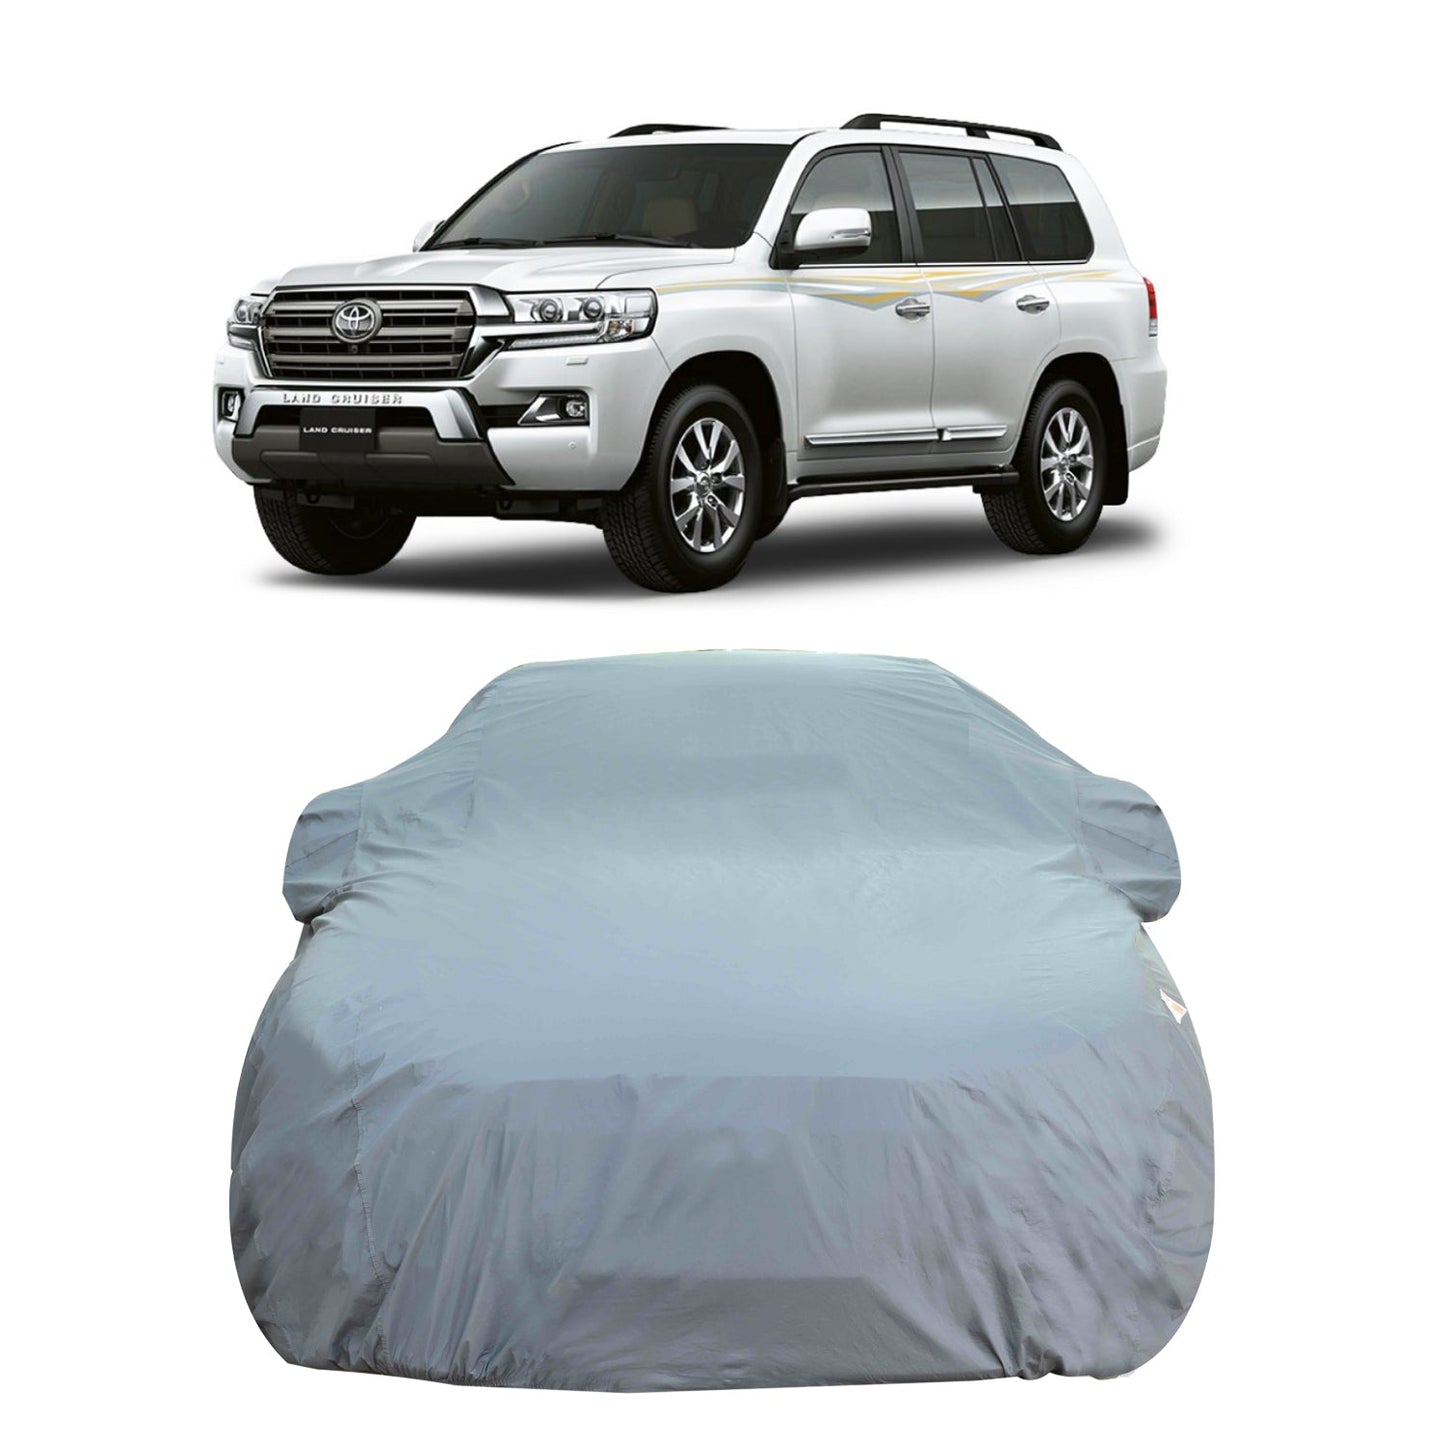 Oshotto Dark Grey 100% Anti Reflective, dustproof and Water Proof Car Body Cover with Mirror Pockets For Toyota Land Cruiser 200